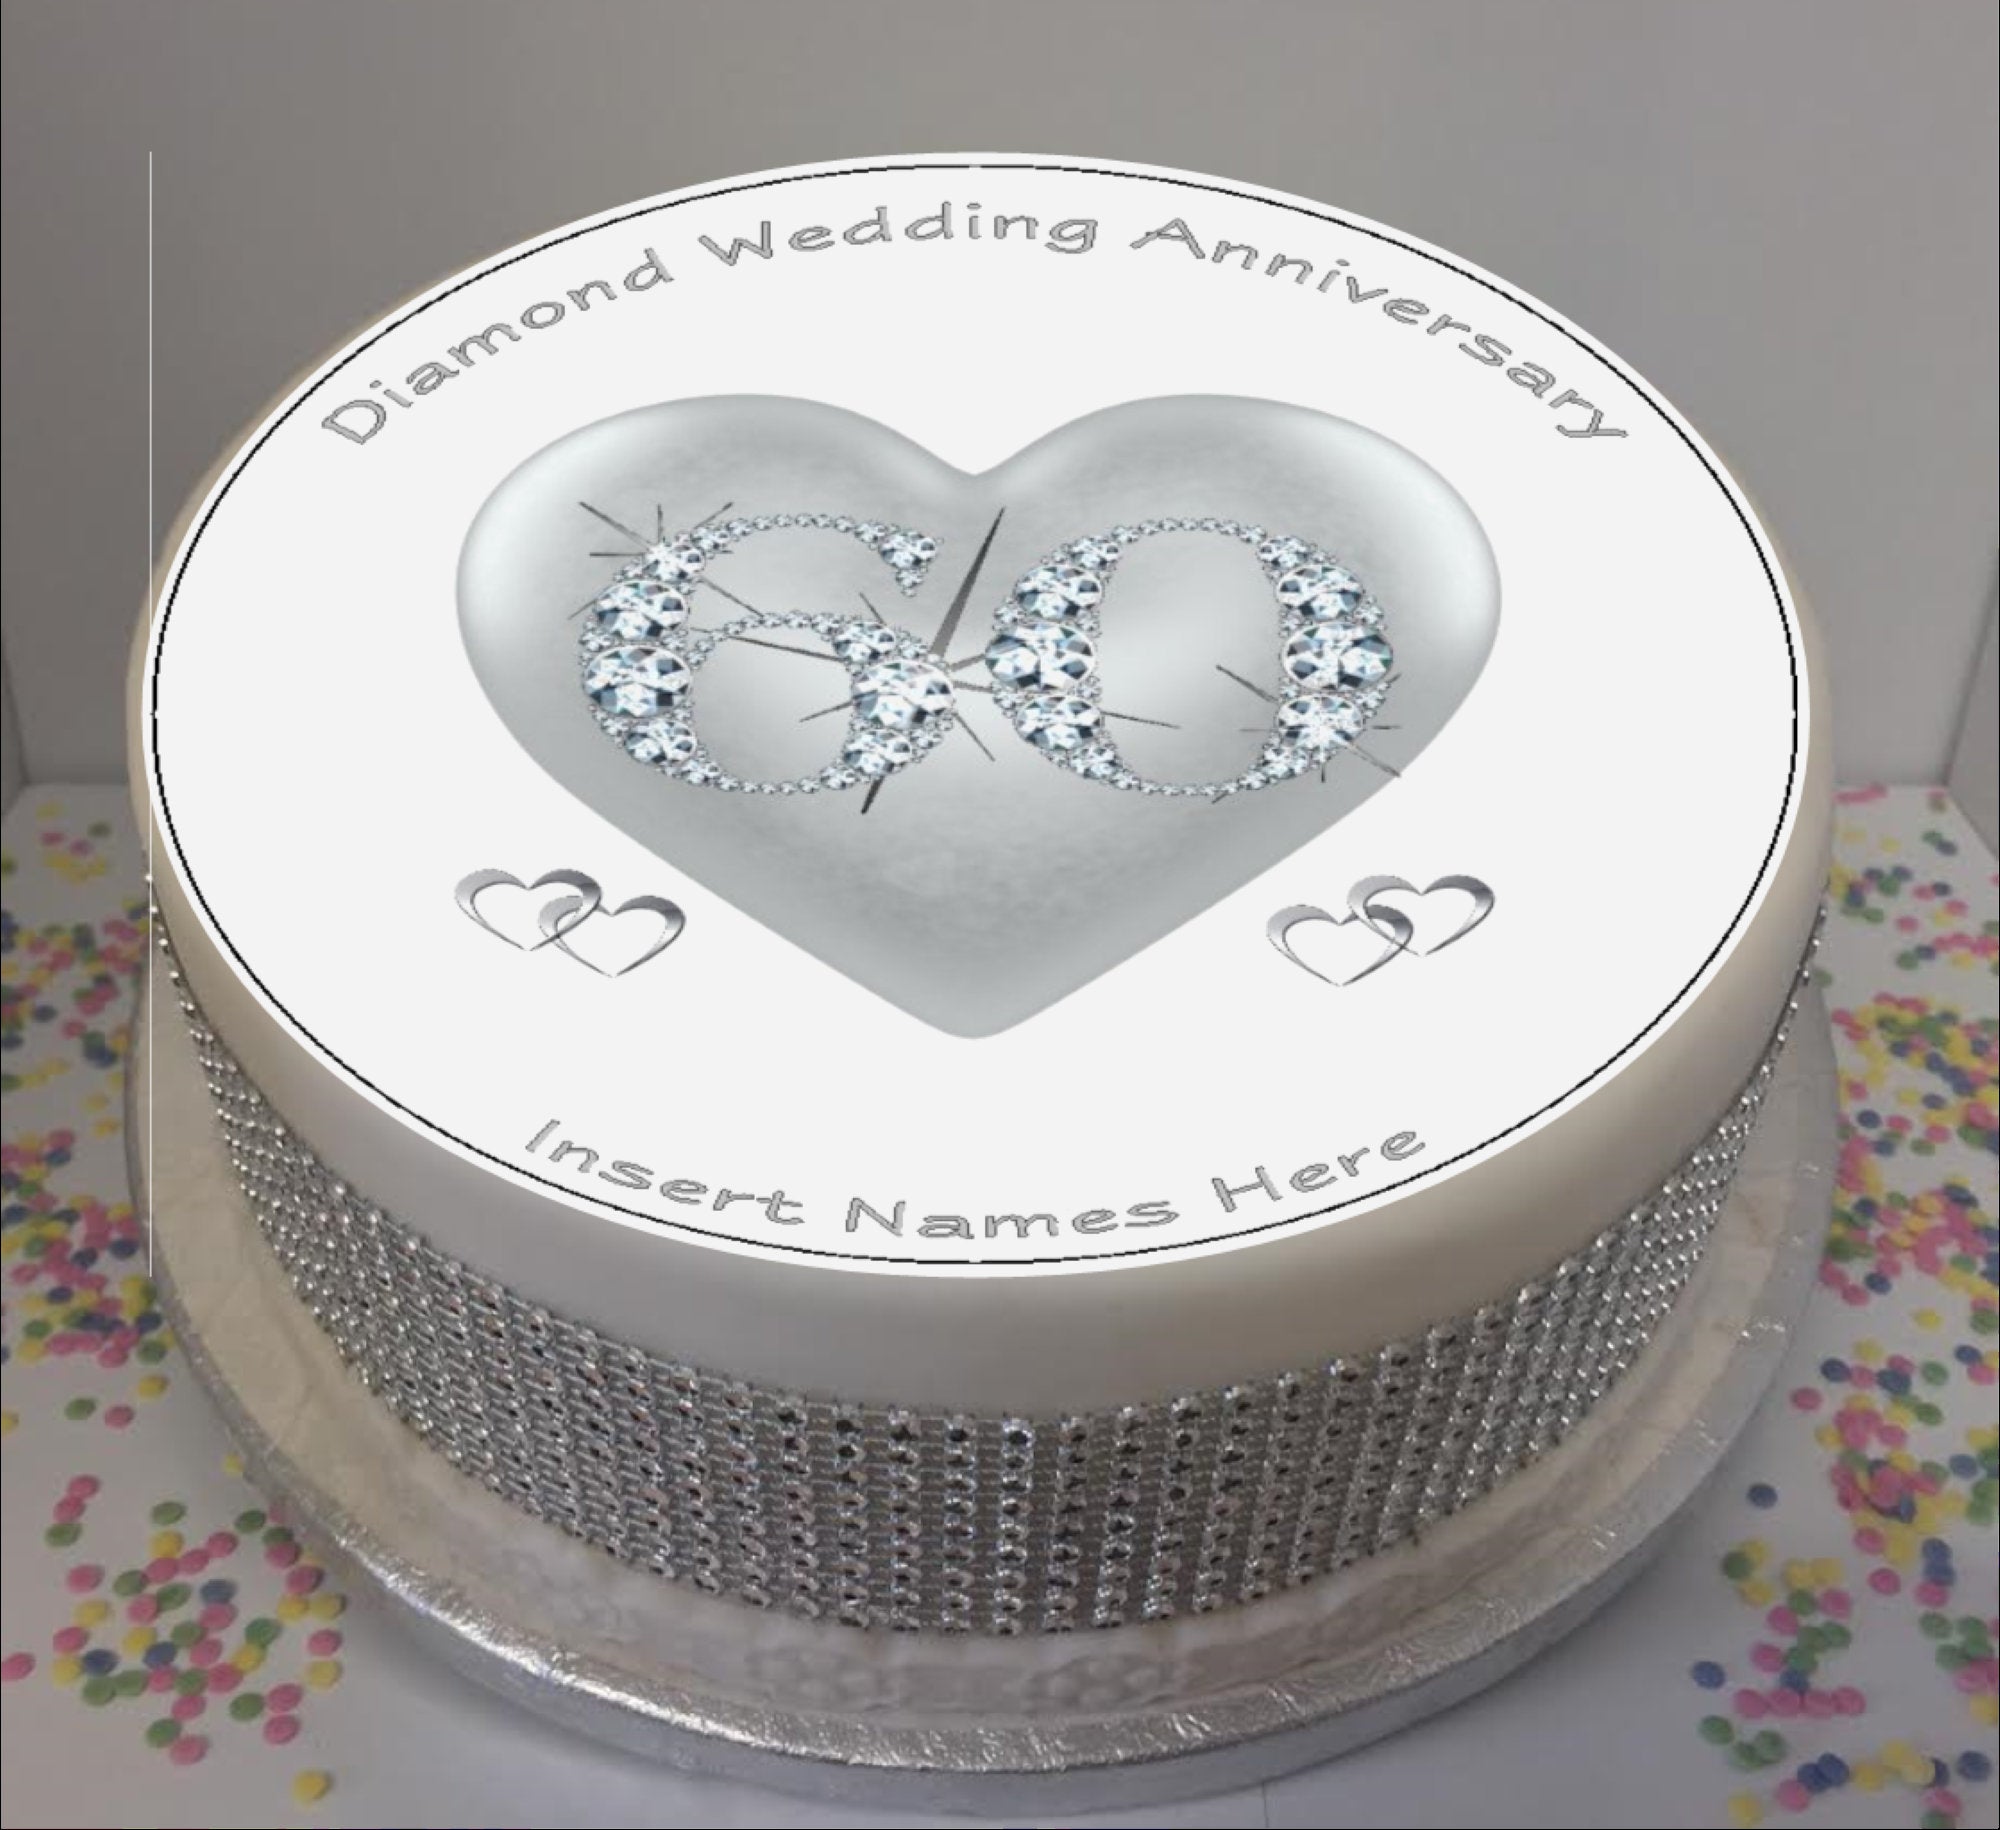 Wedding Anniversary Cake - Buy Online, Free UK Delivery — New Cakes